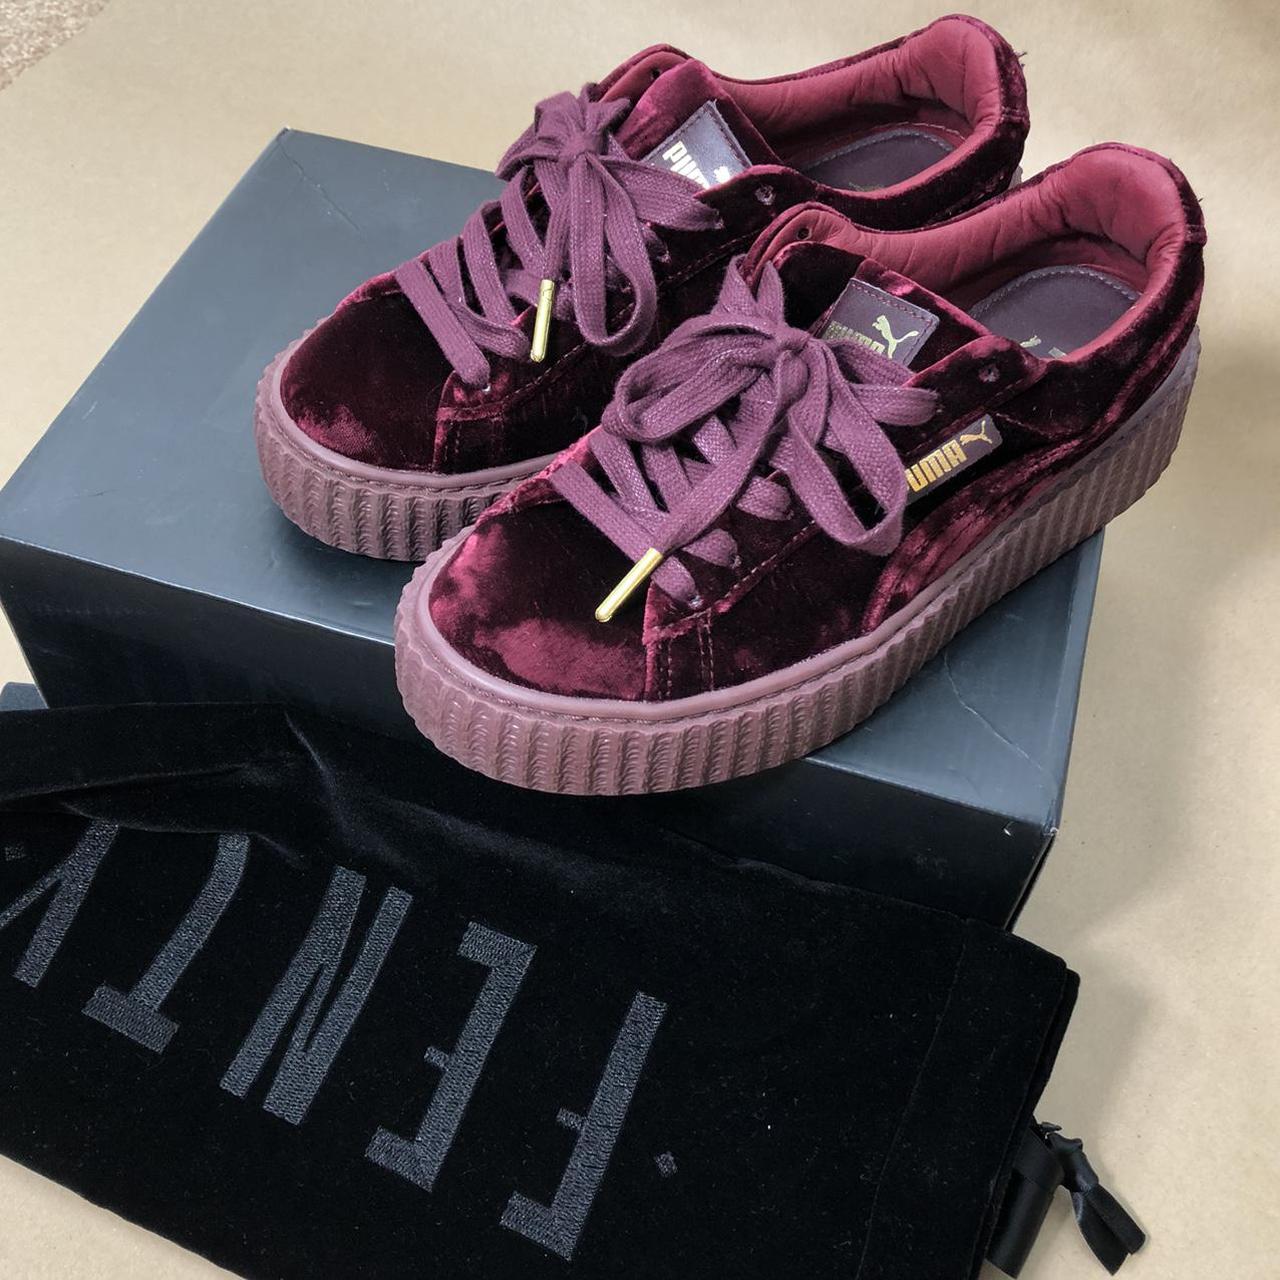 Product Image 1 - Puma fenty suede creepers 
Comes